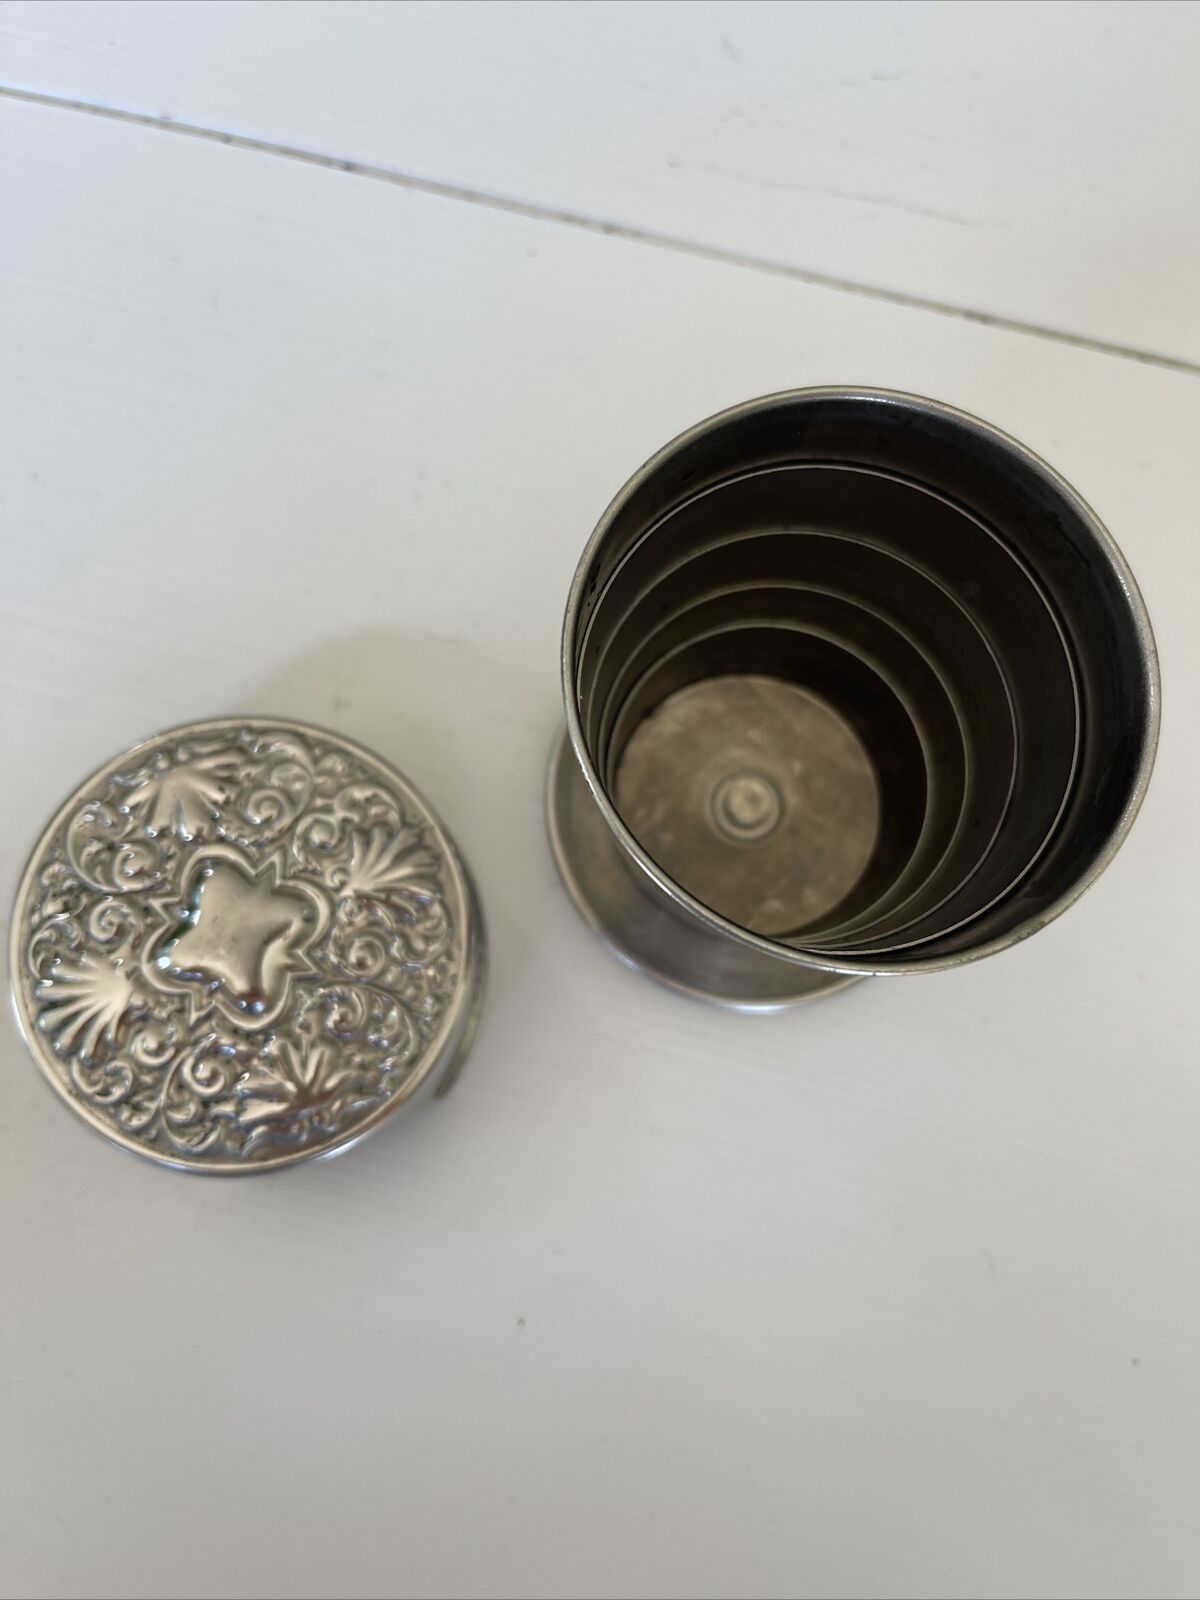 Vintage Portable Tin Drinking Cup